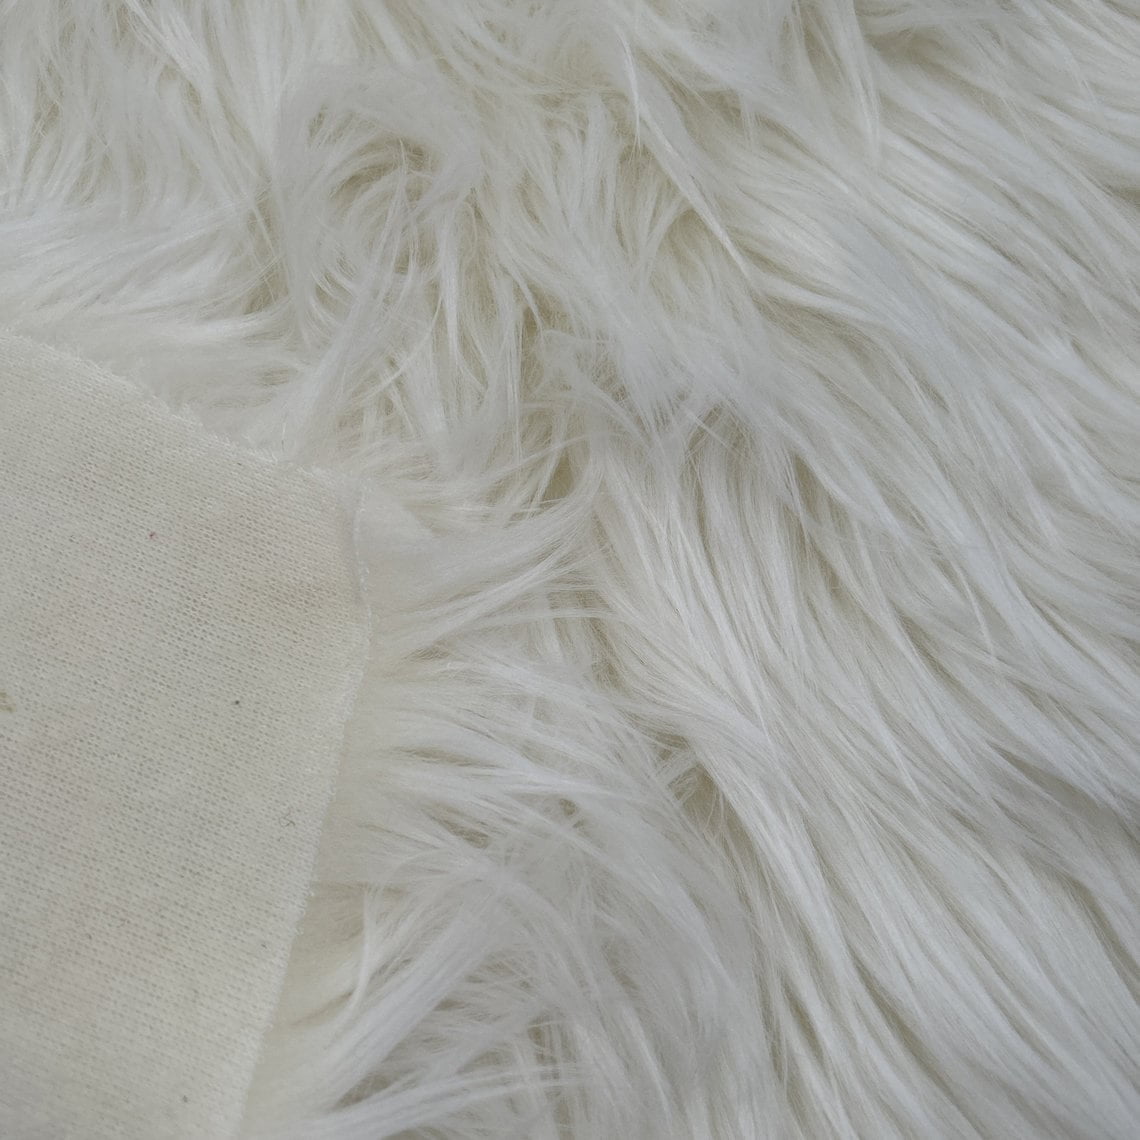 Faux/Fake Fur Mongolian Fabric Sold by The Yard (White)